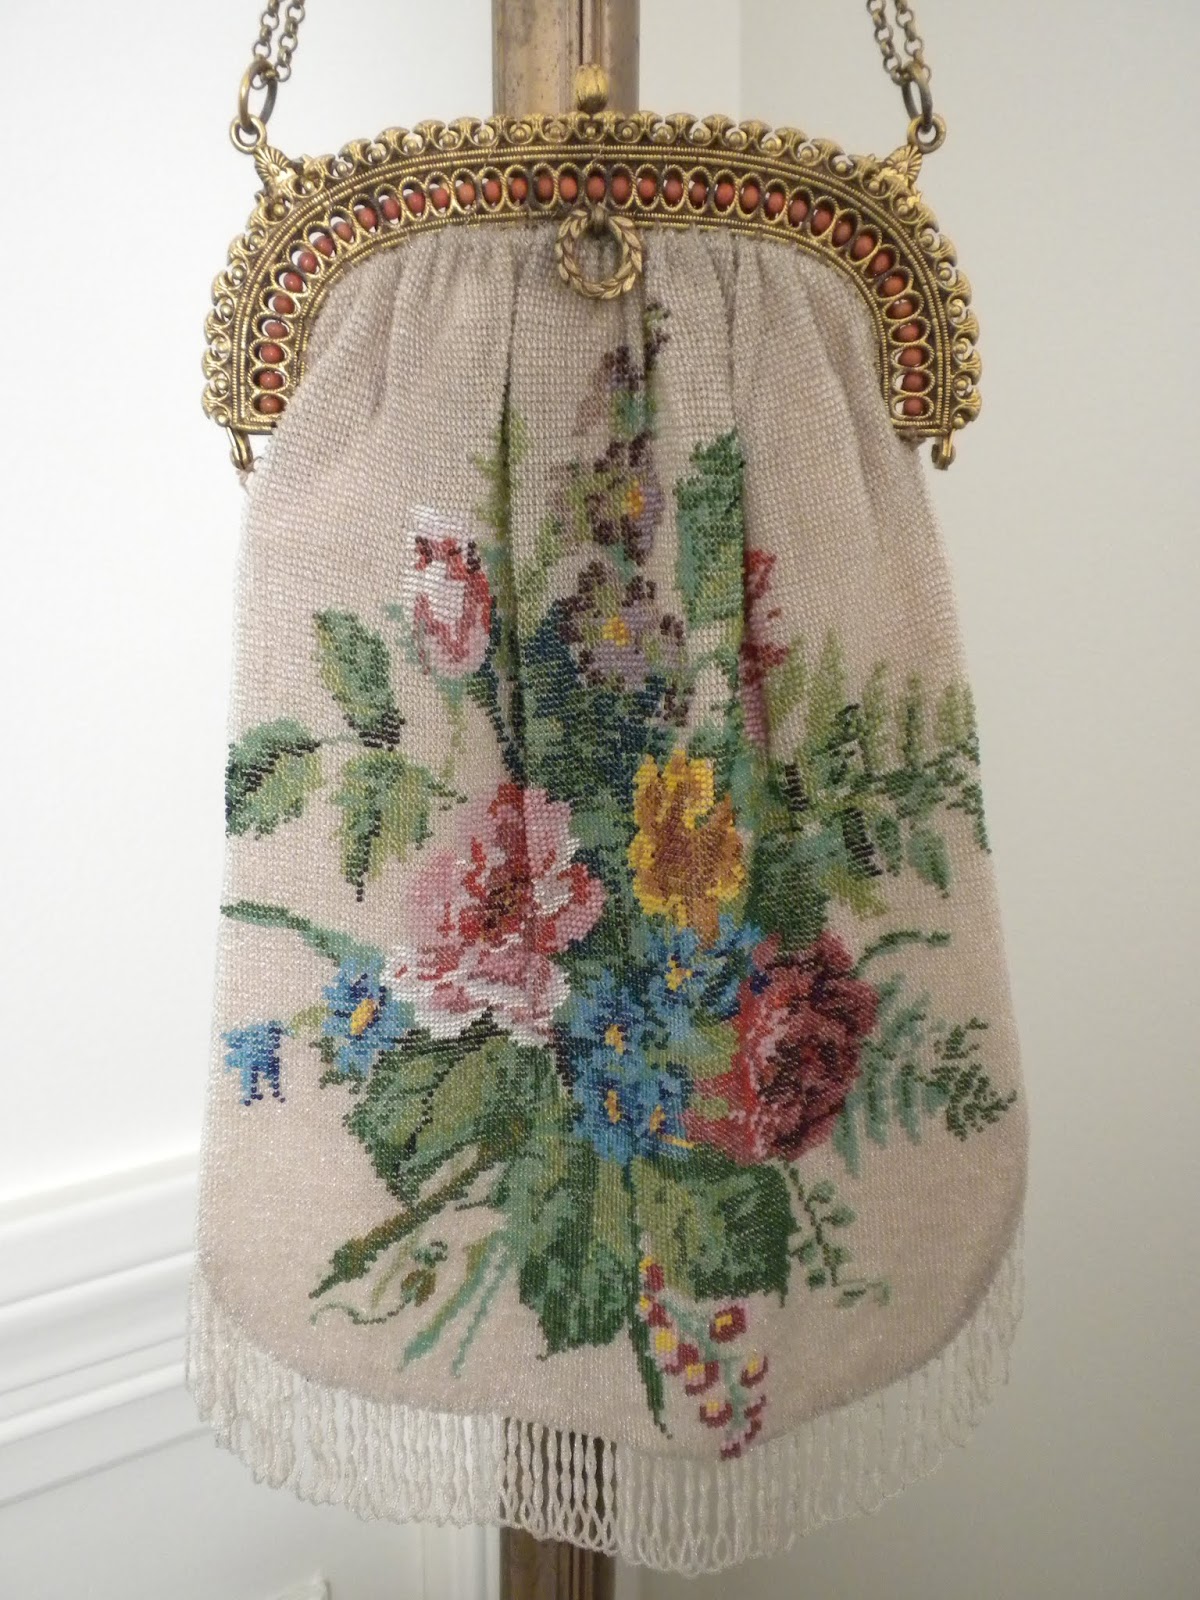 Vintage French Floral Beaded Purse